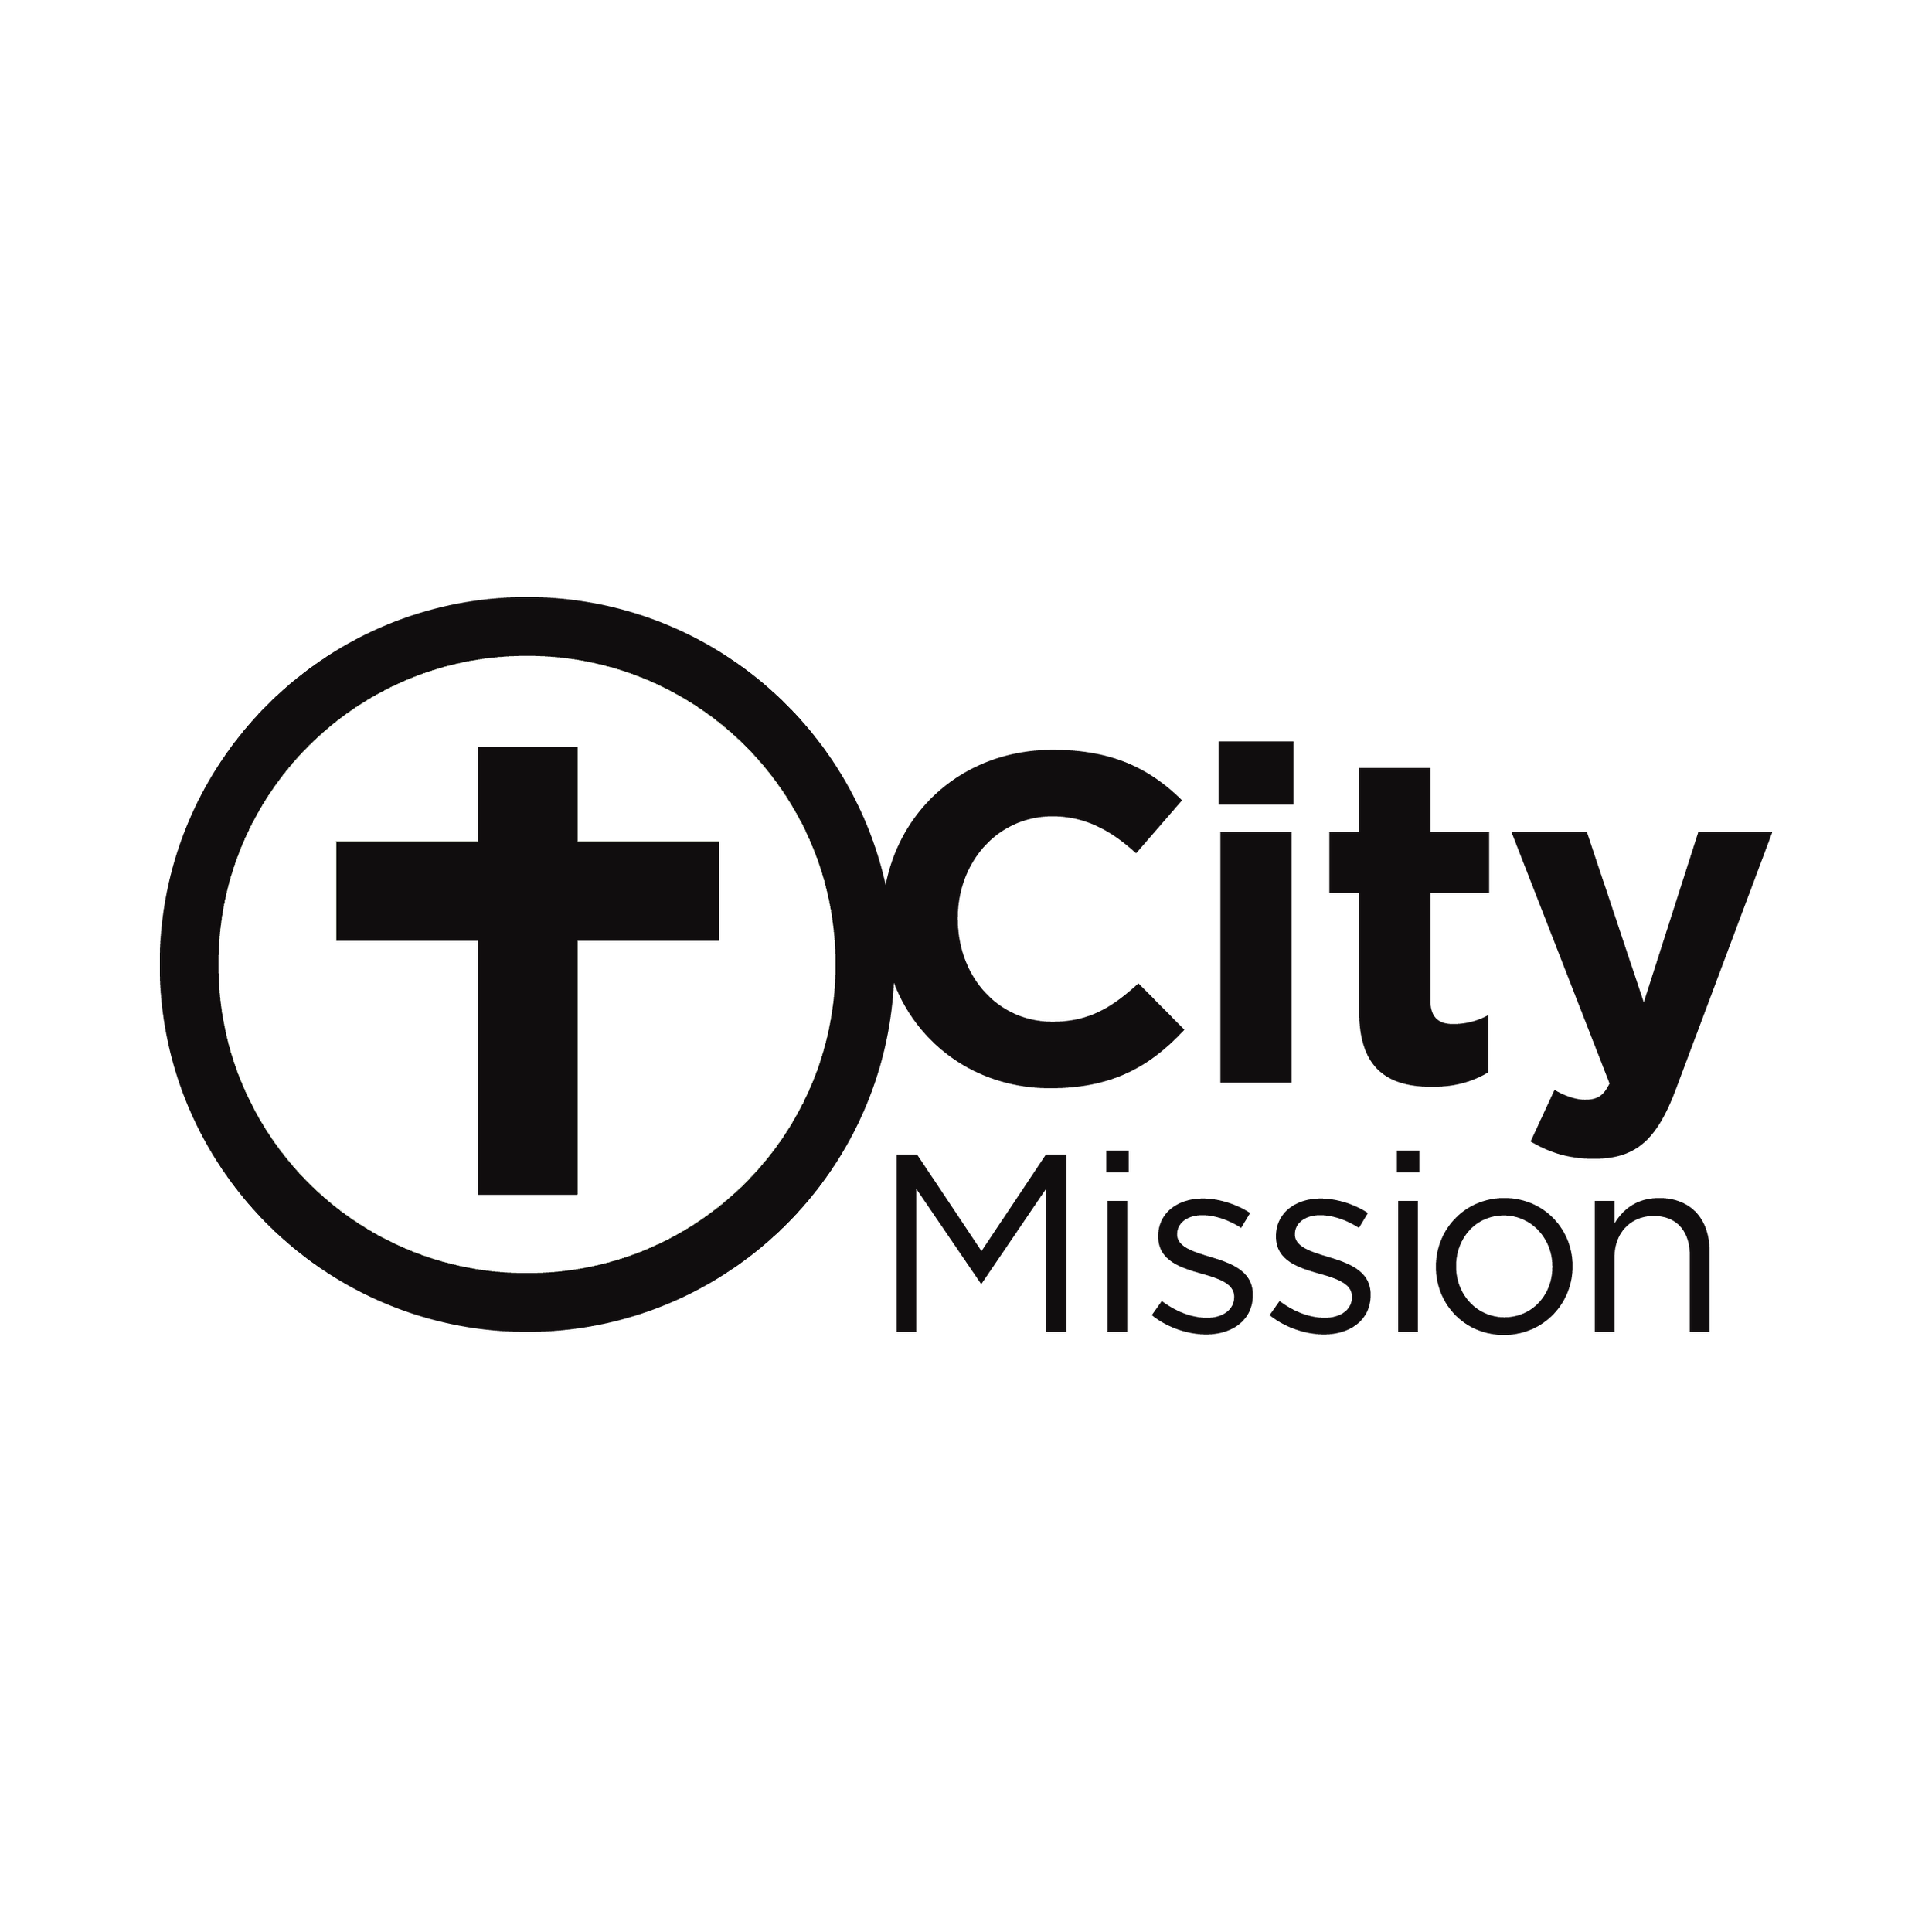 City_Mission_Logo_2019_stacked (003) black and white.png